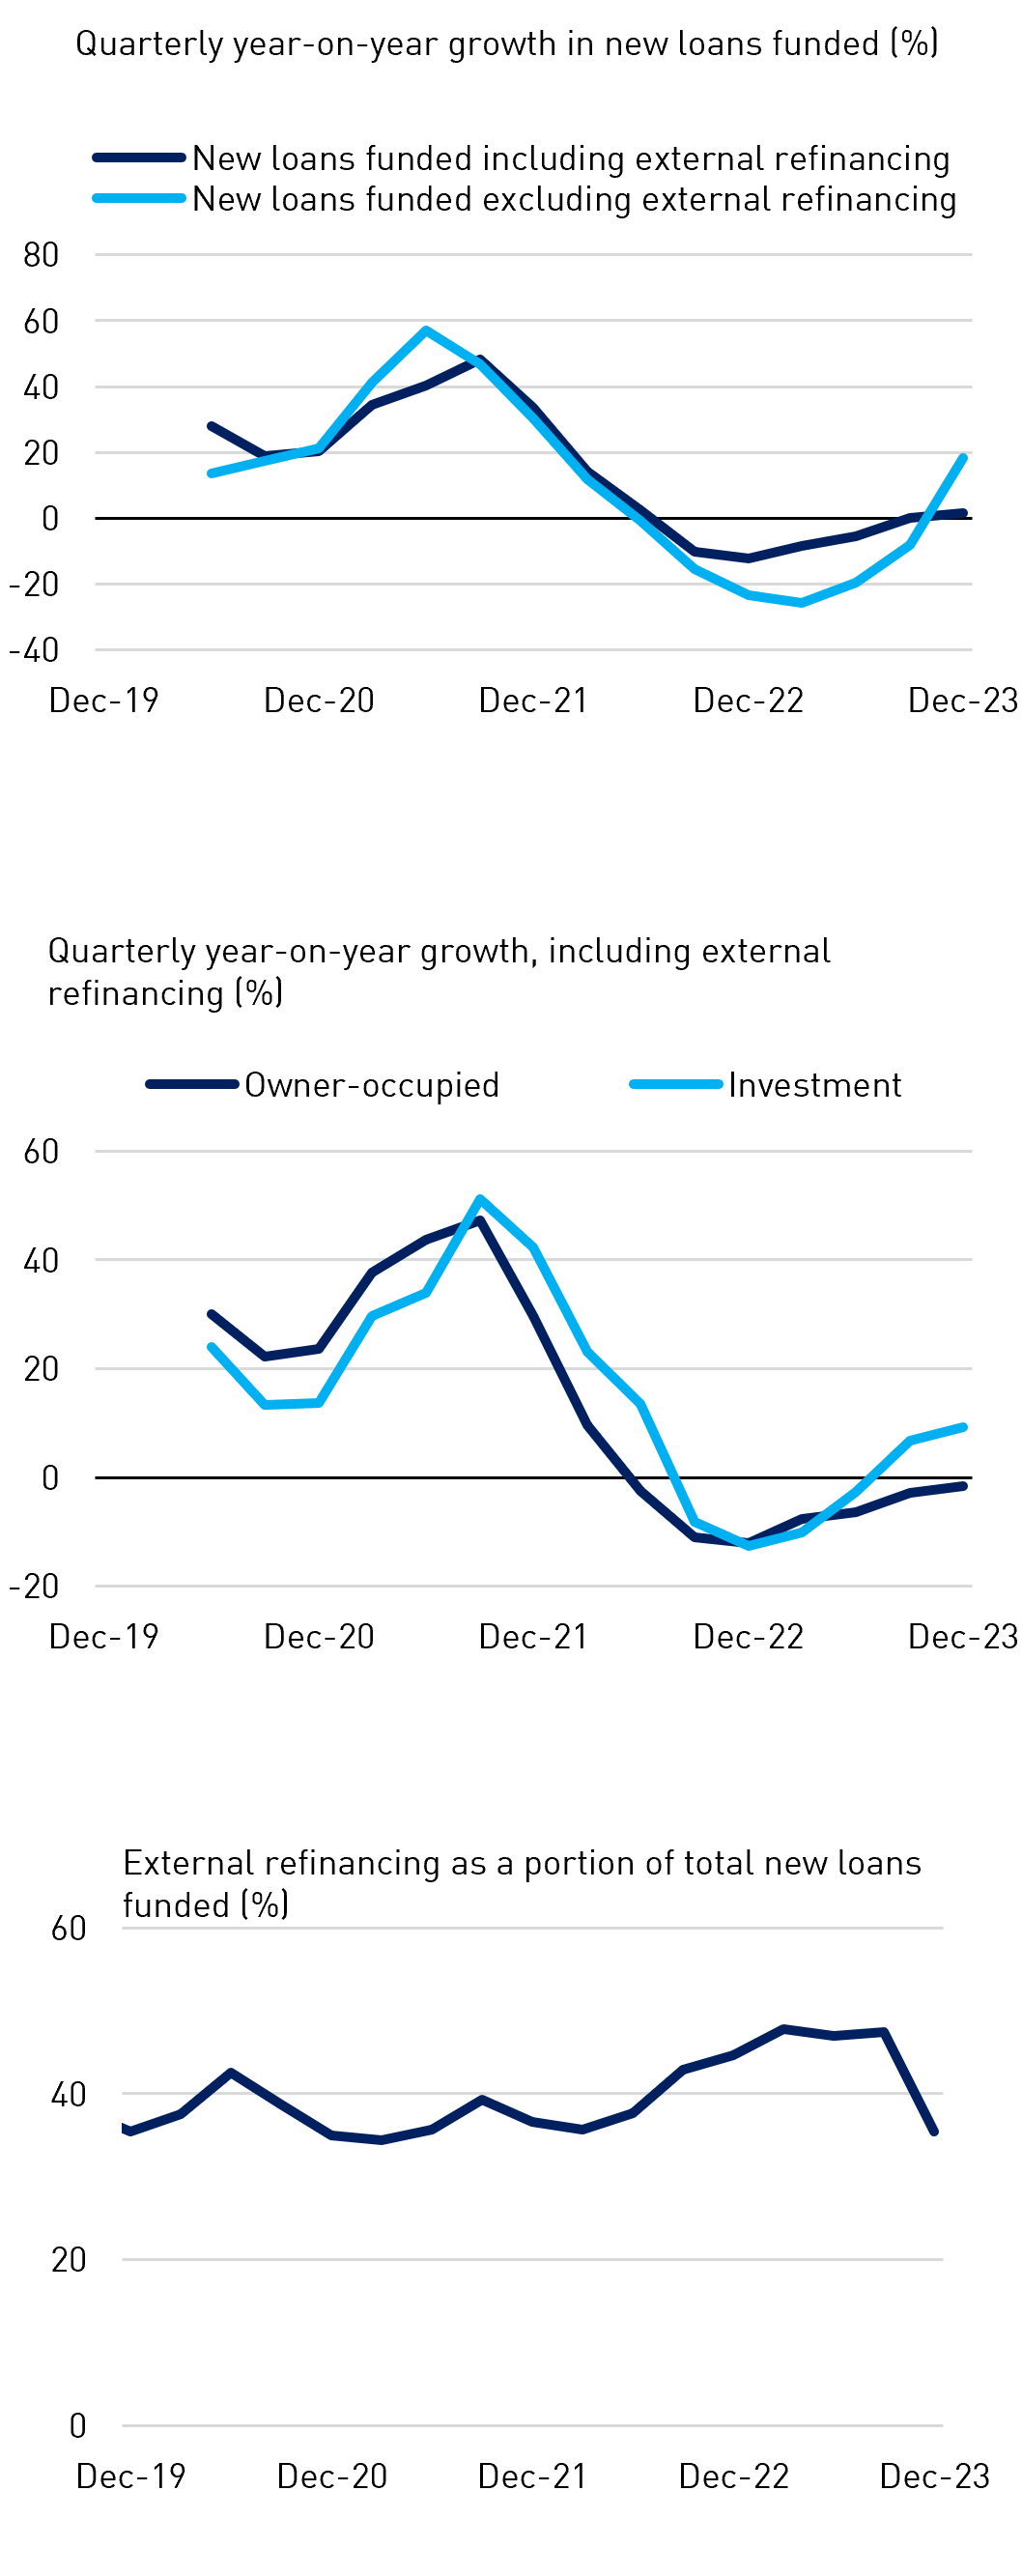 Quarterly year-on-year growth in new loans funded (%) and Quarterly year-on-year growth, including external refinancing (%) and External refinancing as a portion of total new loans funded (%)